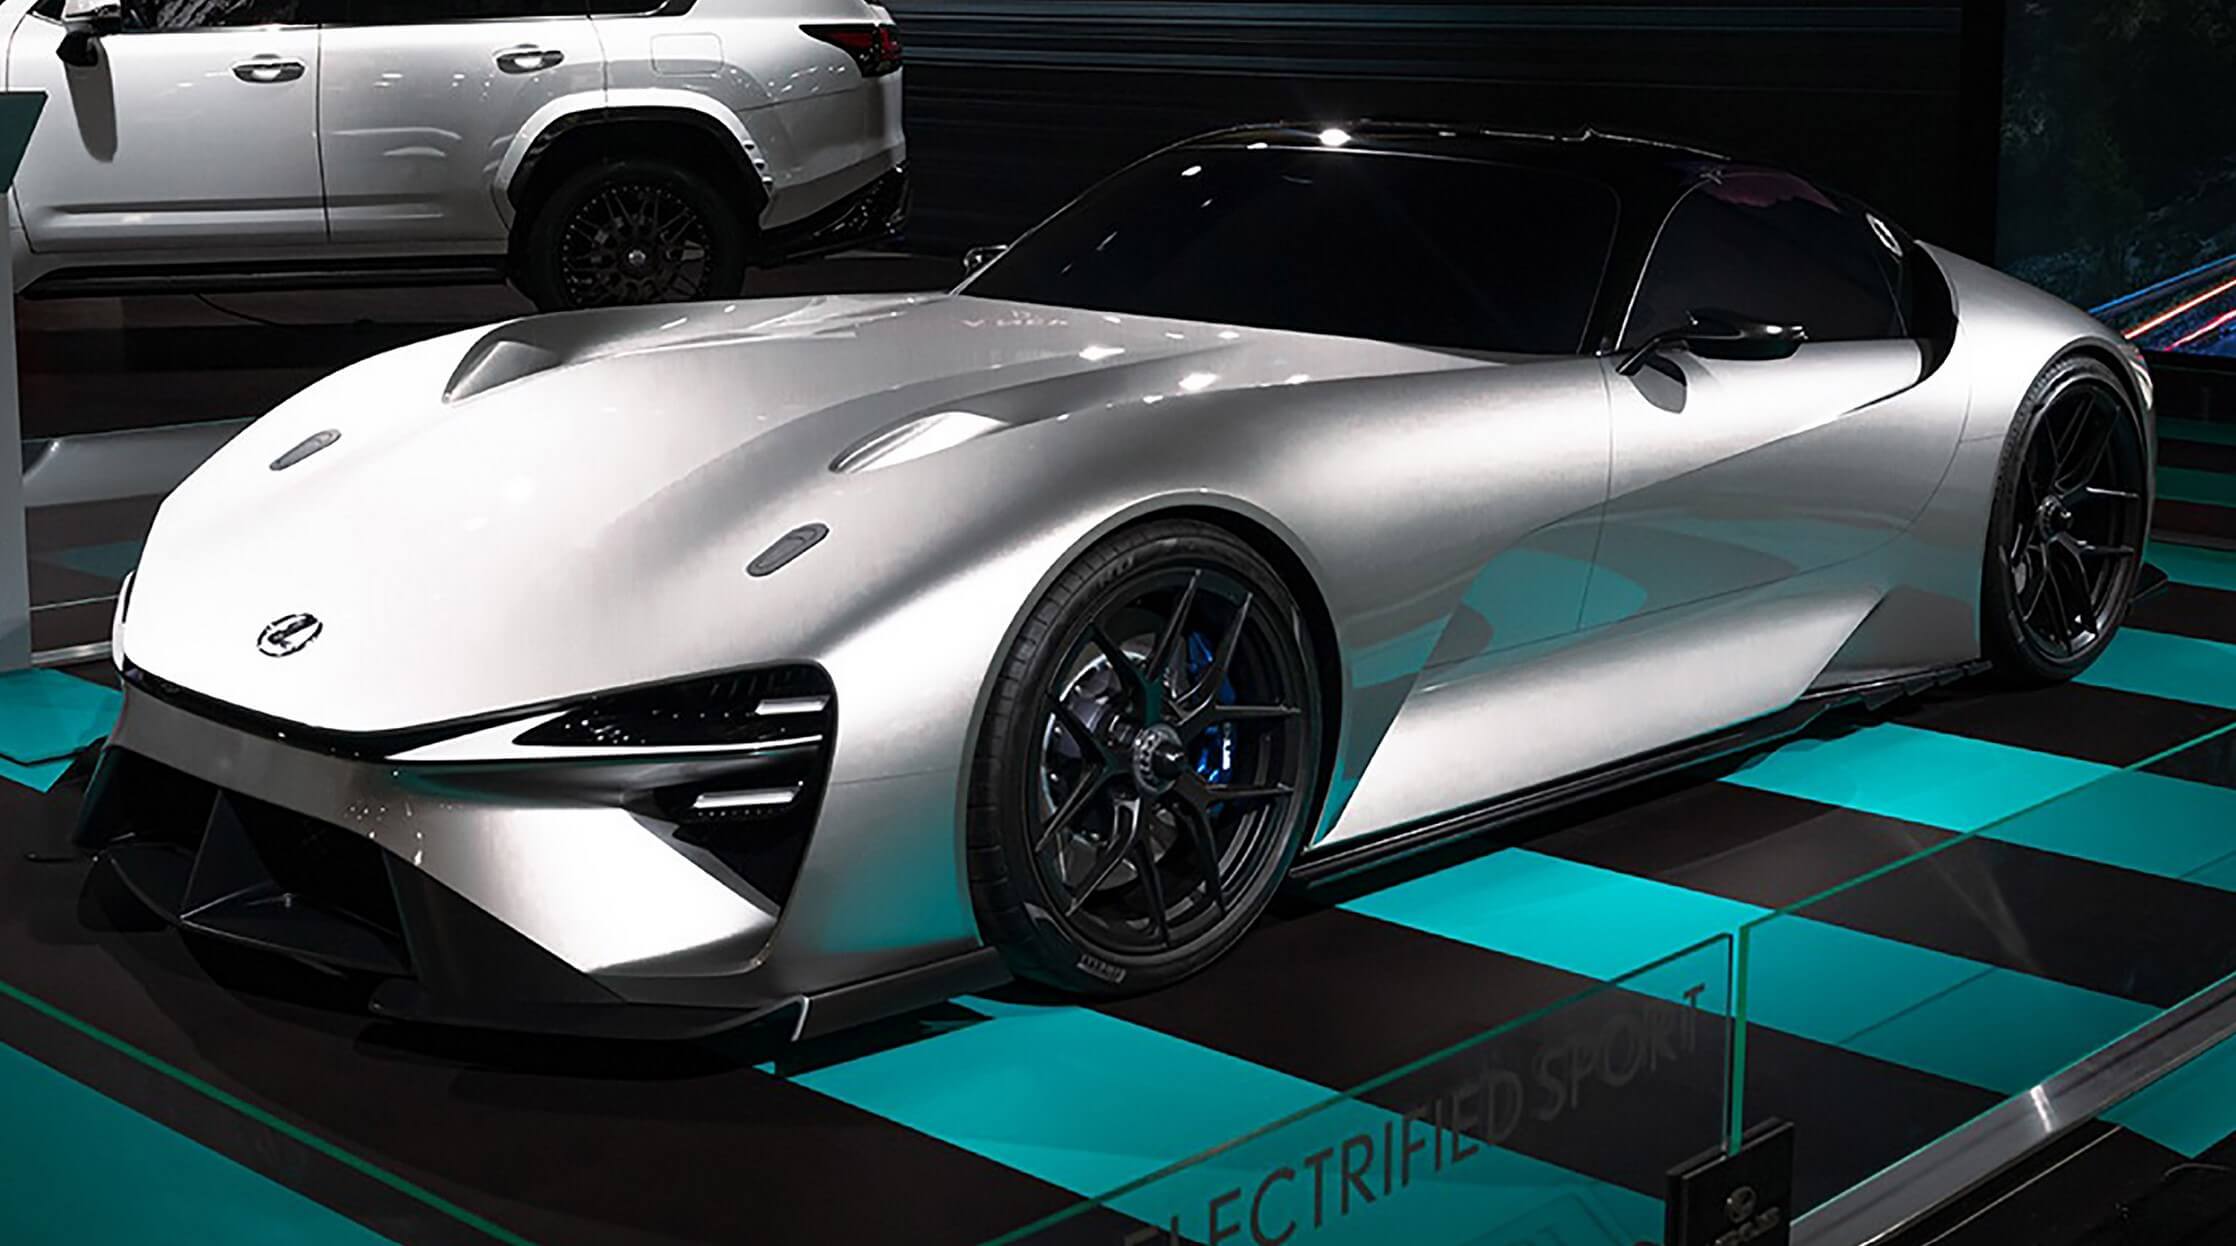 aria-label="Lexus electric supercar ons tage 1"